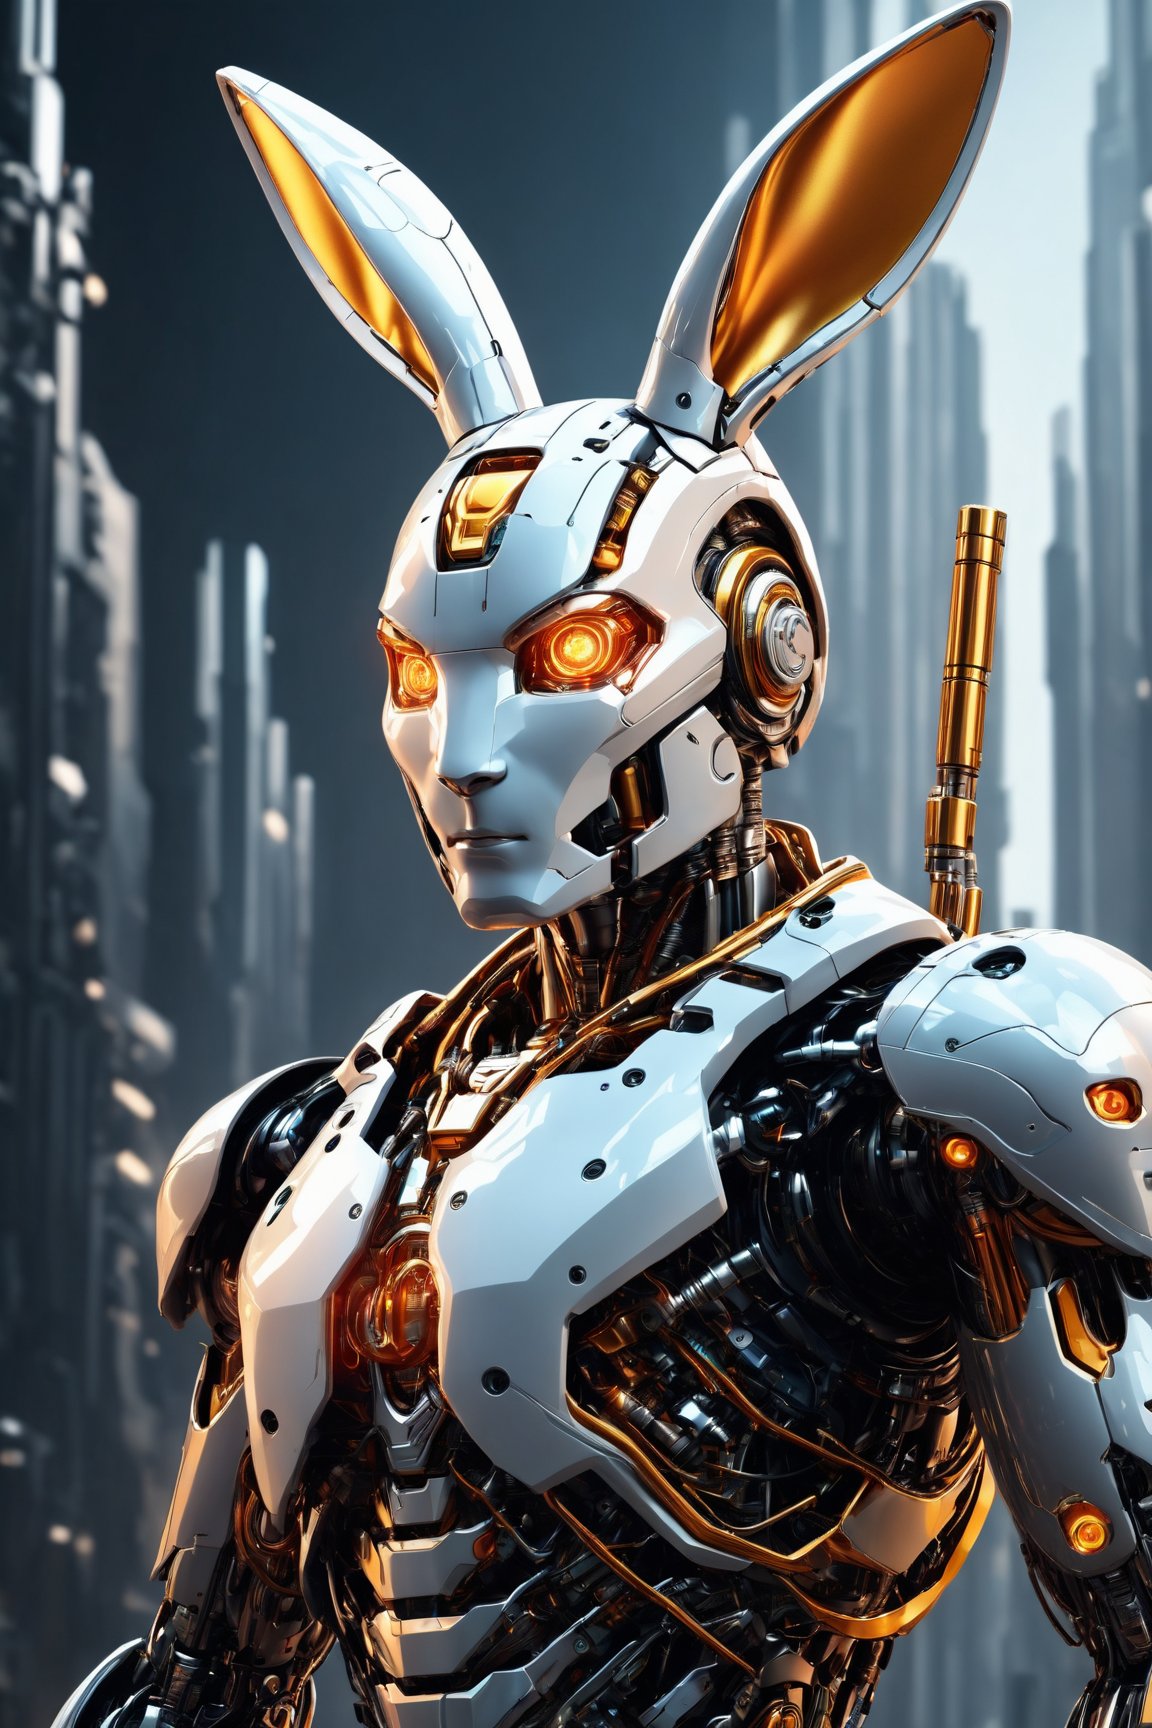 Create an (8K, high-definition resolution) vector illustration of a (male cyborg) in a (standing position). The composition should achieve (perfect centralization) with the character (Donnie's rabbit) by his side. The cyborg is (centered) and (facing the camera) with a gaze that signifies (nearing perfection). Yet, there's a sense of (sadness) and (despair) evident in his expression. The illustration should depict the cyborg's (full body) with his (hands on his head), conveying an (abstract beauty) in a (dynamic) and (highly detailed) style. The image should have (smooth) and (sharp focus) to capture intricate details, creating an impressive and emotionally charged piece of (illustration).